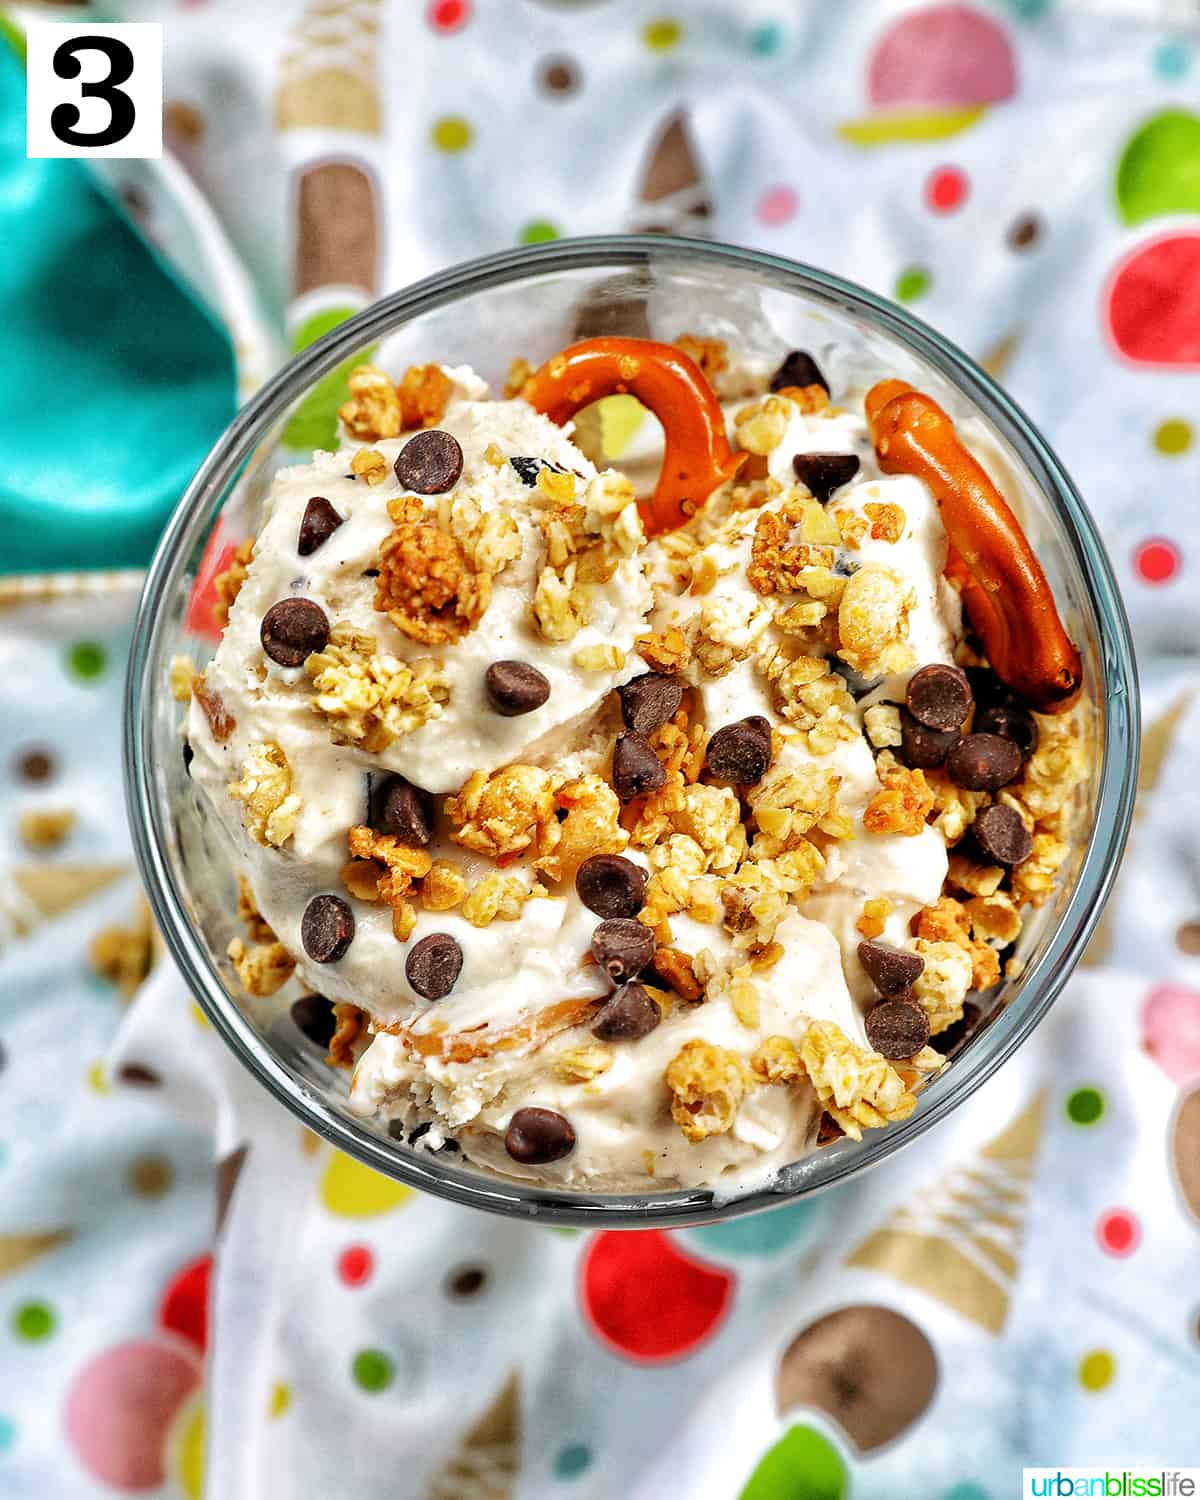 ice cream parfait topped with granola, mini chocolate chips on a colorful kitchen towel.